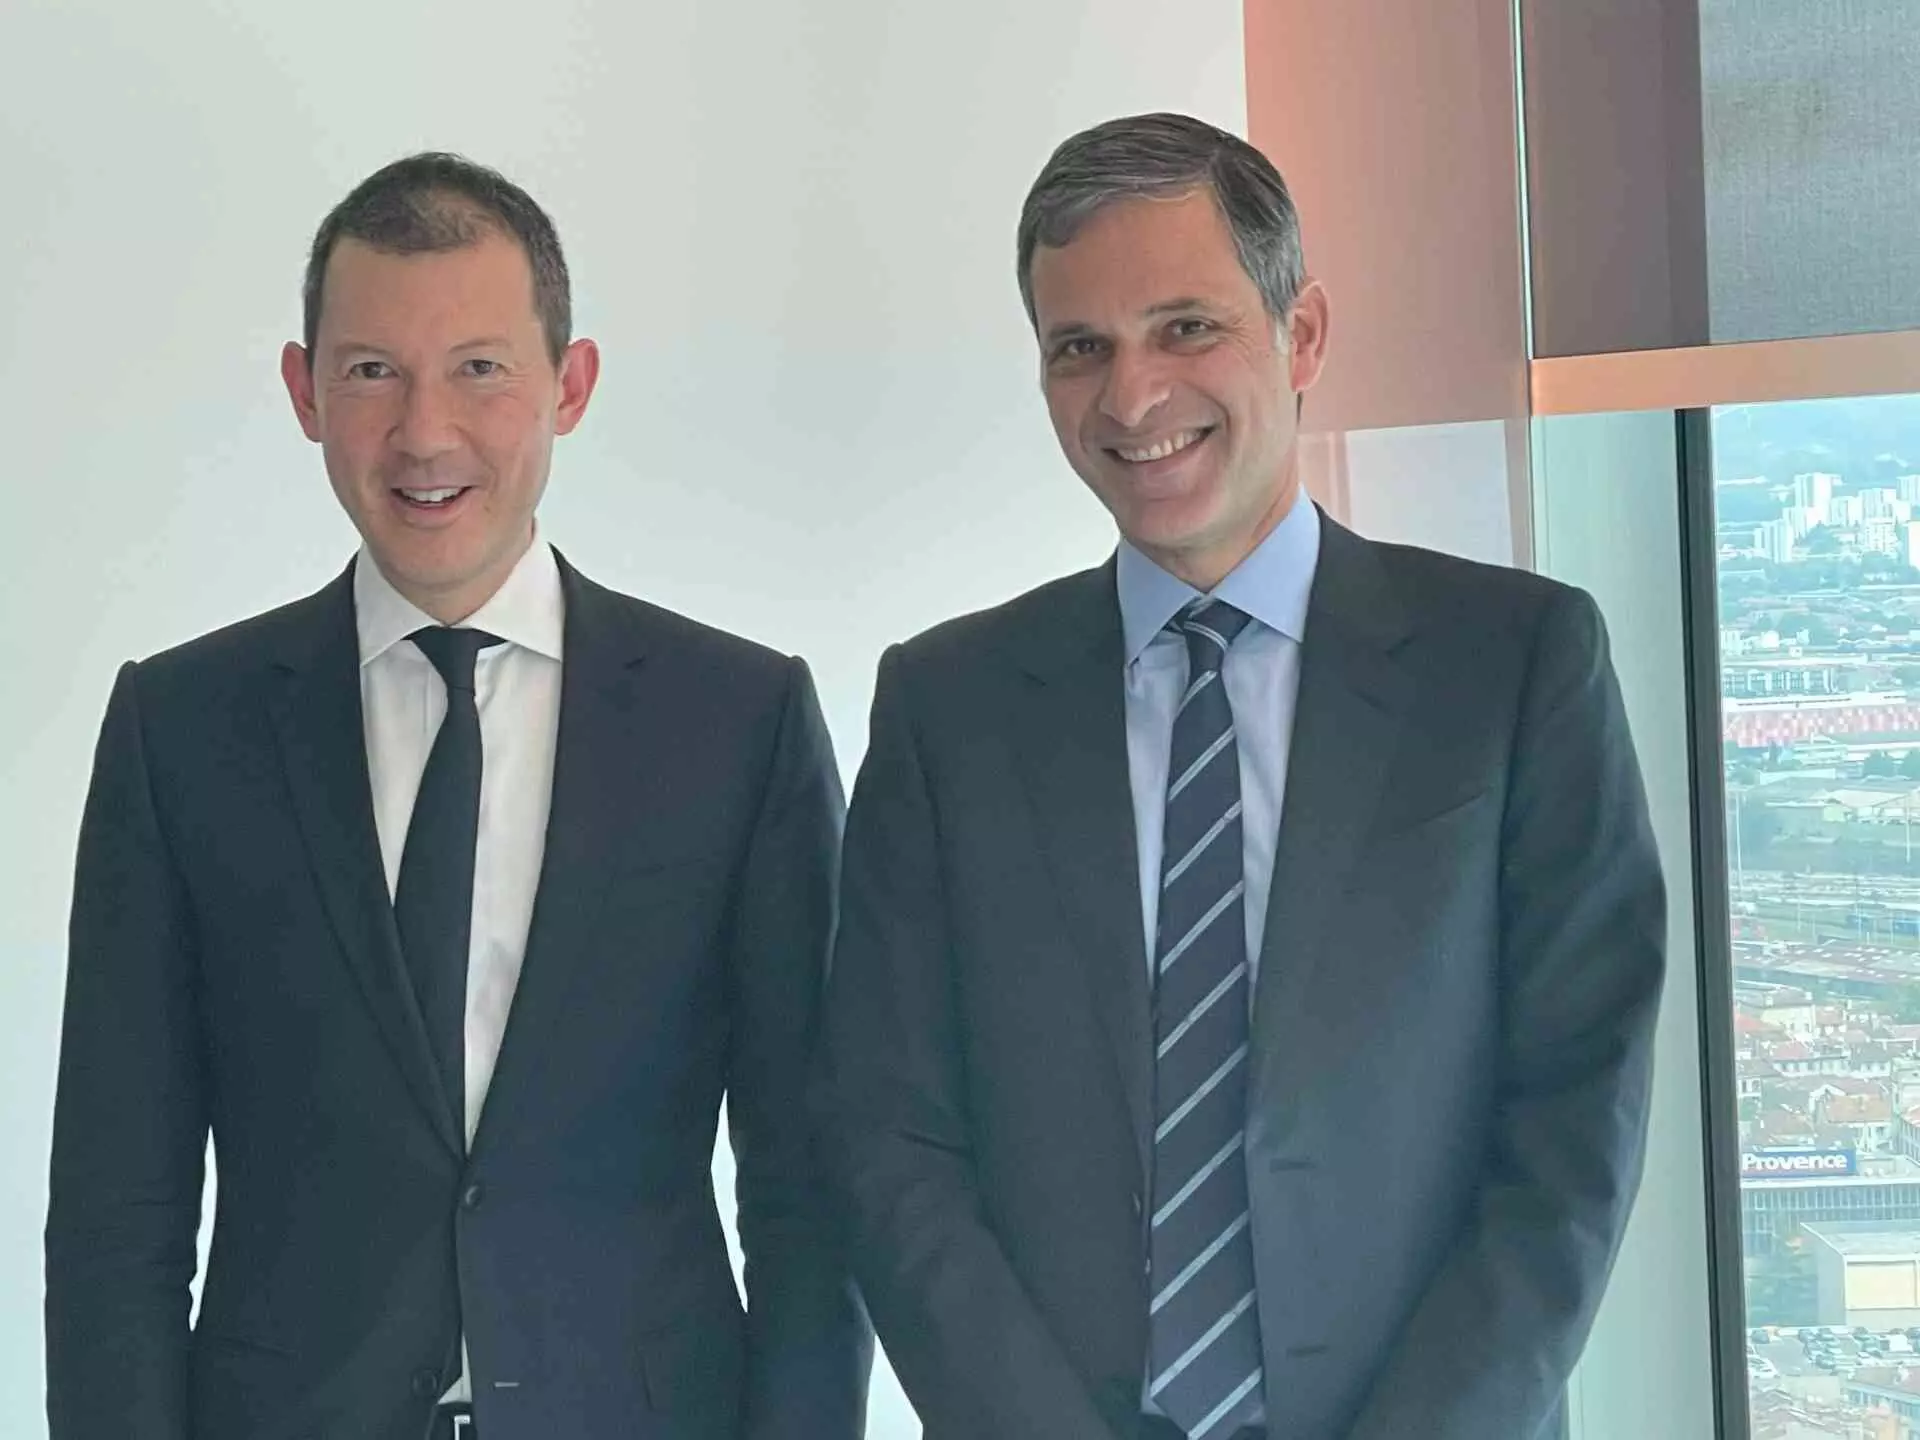 (L-R) Air France-KLM Group CEO Benjamin Smith and Rodolphe Saadé, chairman and CEO of the CMA CGM Group